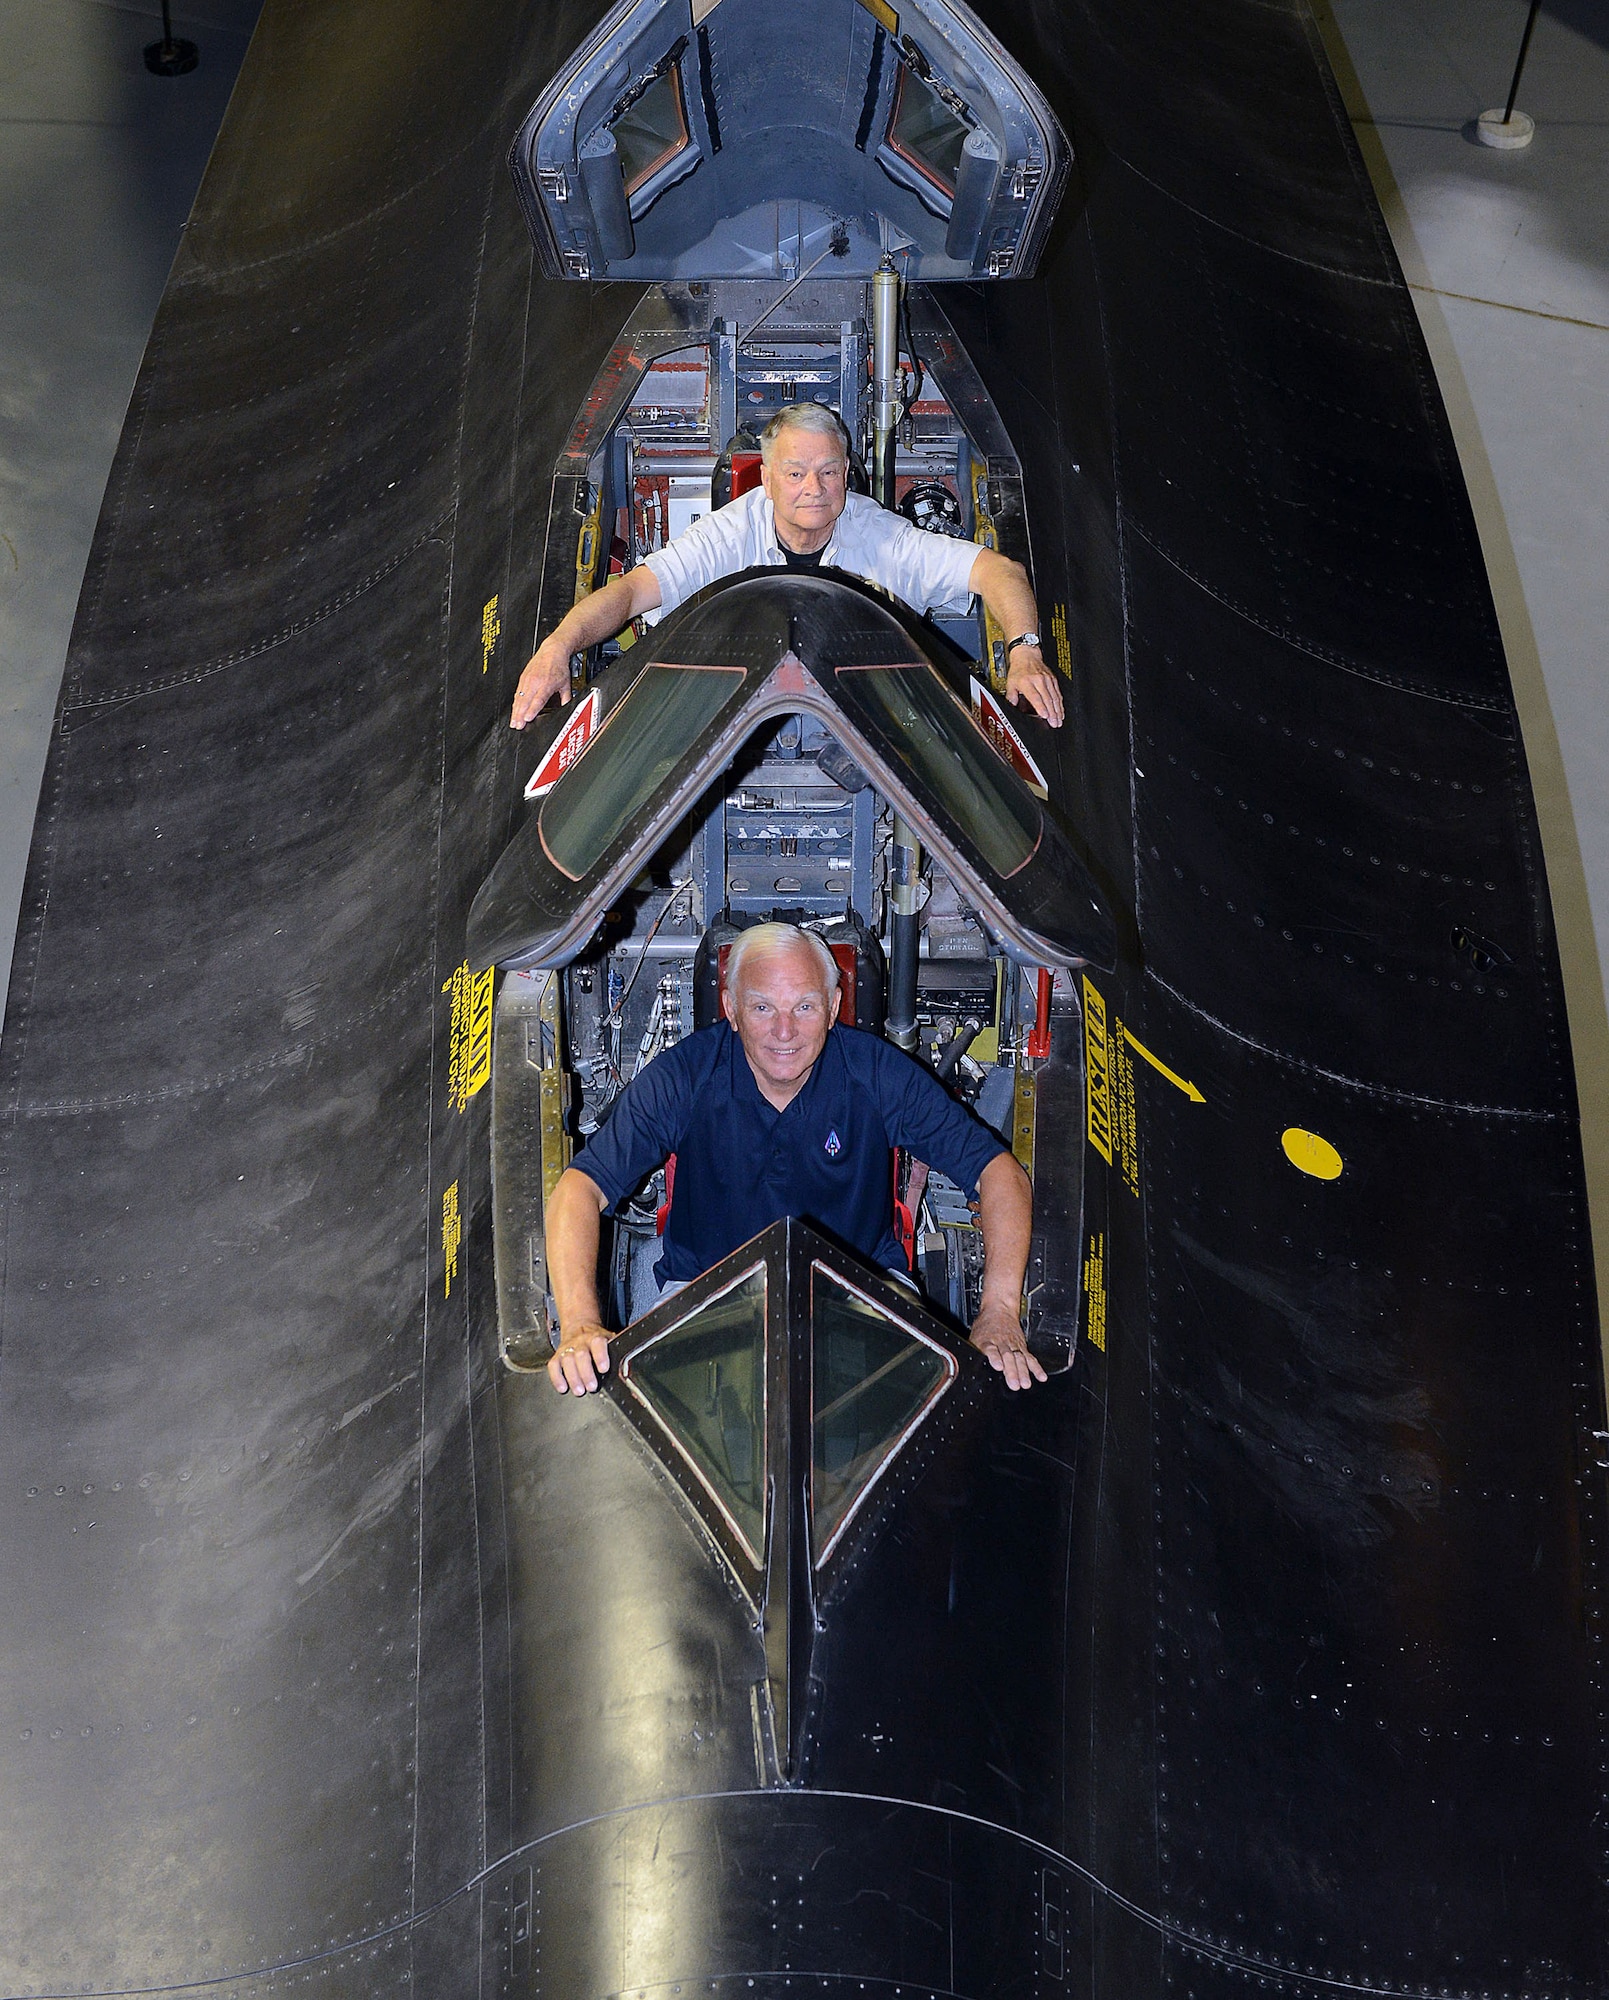 Maj. Gen. Eldon “Al” Joersz, USAF pilot retired, front, and Lt. Col. George “GT” Morgan, USAF retired reconnaissance systems officer, sit inside the cockpit of the SR-71 aircraft they flew when setting the world absolute speed record for jet-powered aircraft on July 28, 1976. The two were at the Museum of Aviation in Warner Robins, Georgia for the 40th anniversary of the historic flight. (U.S. Air Force photo by Tommie Horton/Released)